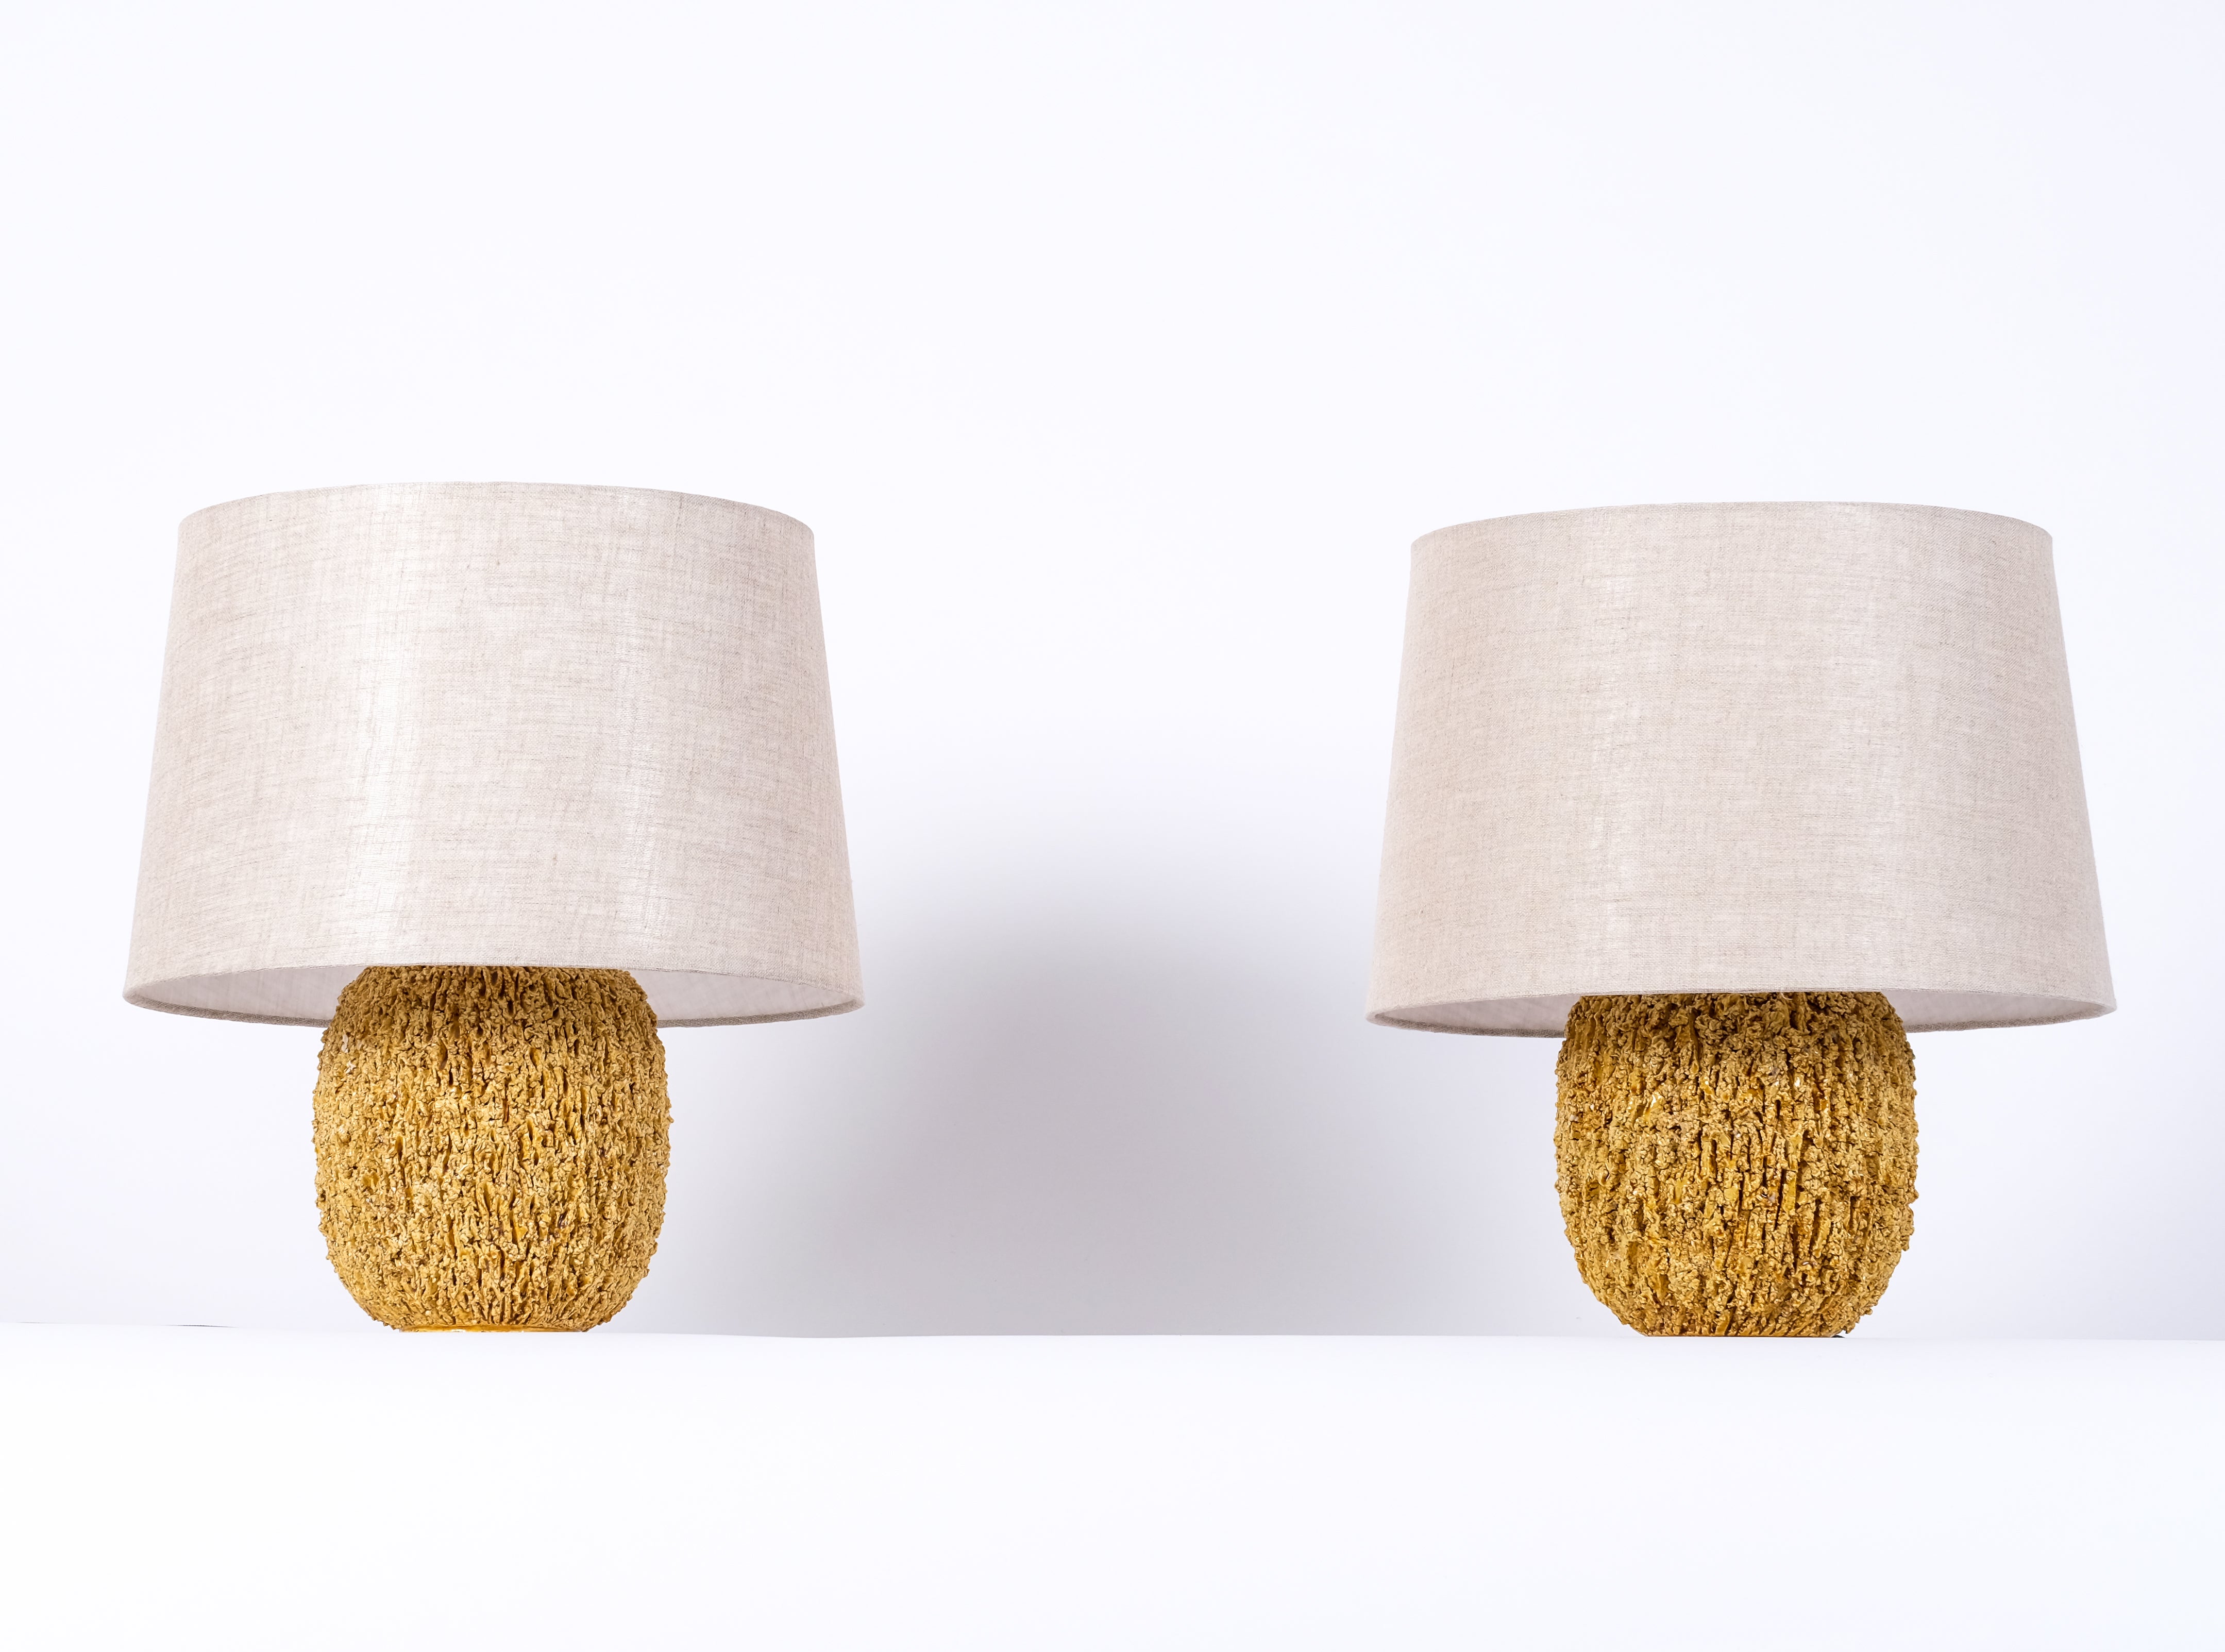 Pair of ceramic table lamps in bulbous shape by Gunnar Nylund, composed of chamotte clay and glazed with a white colored luster glaze. Produced by Rörstrand. Stamped.